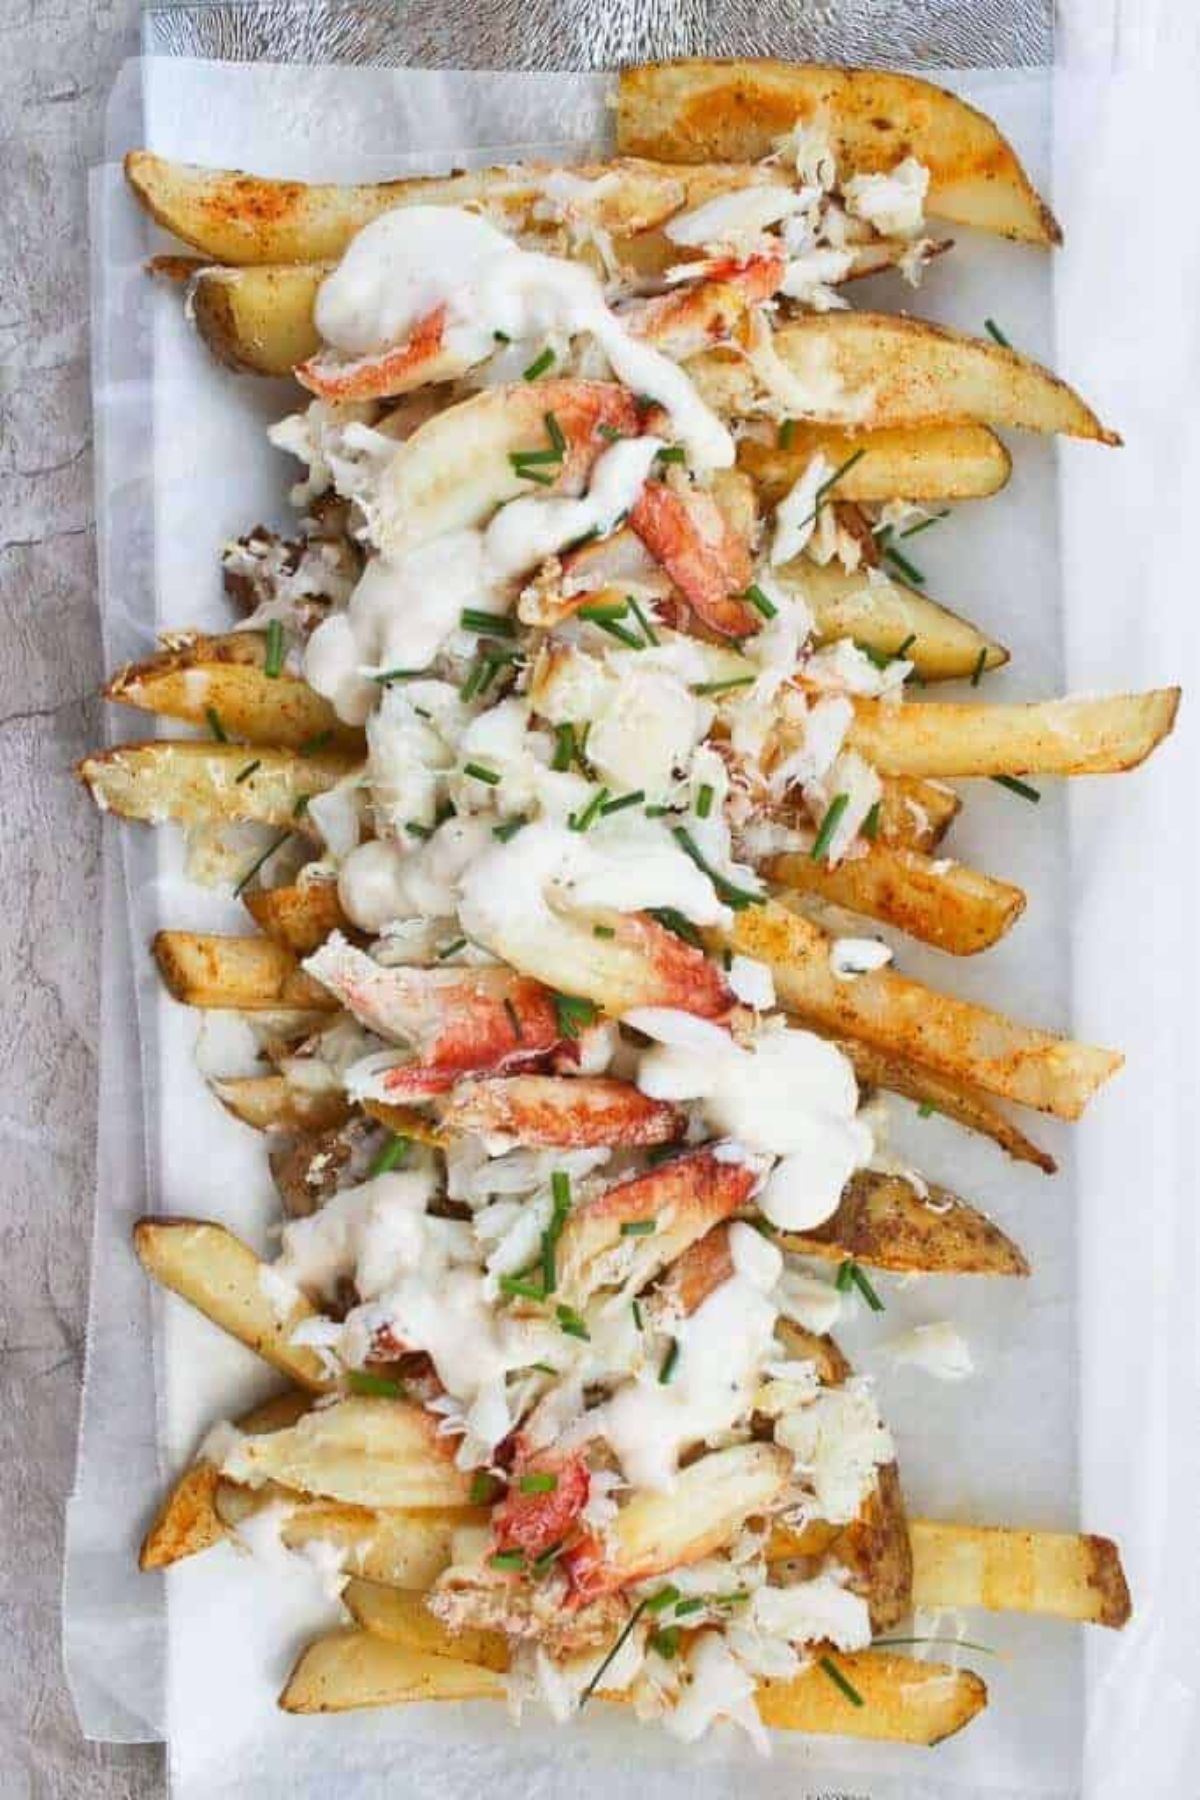 Platter of potato french fries covered in crab and sauce.